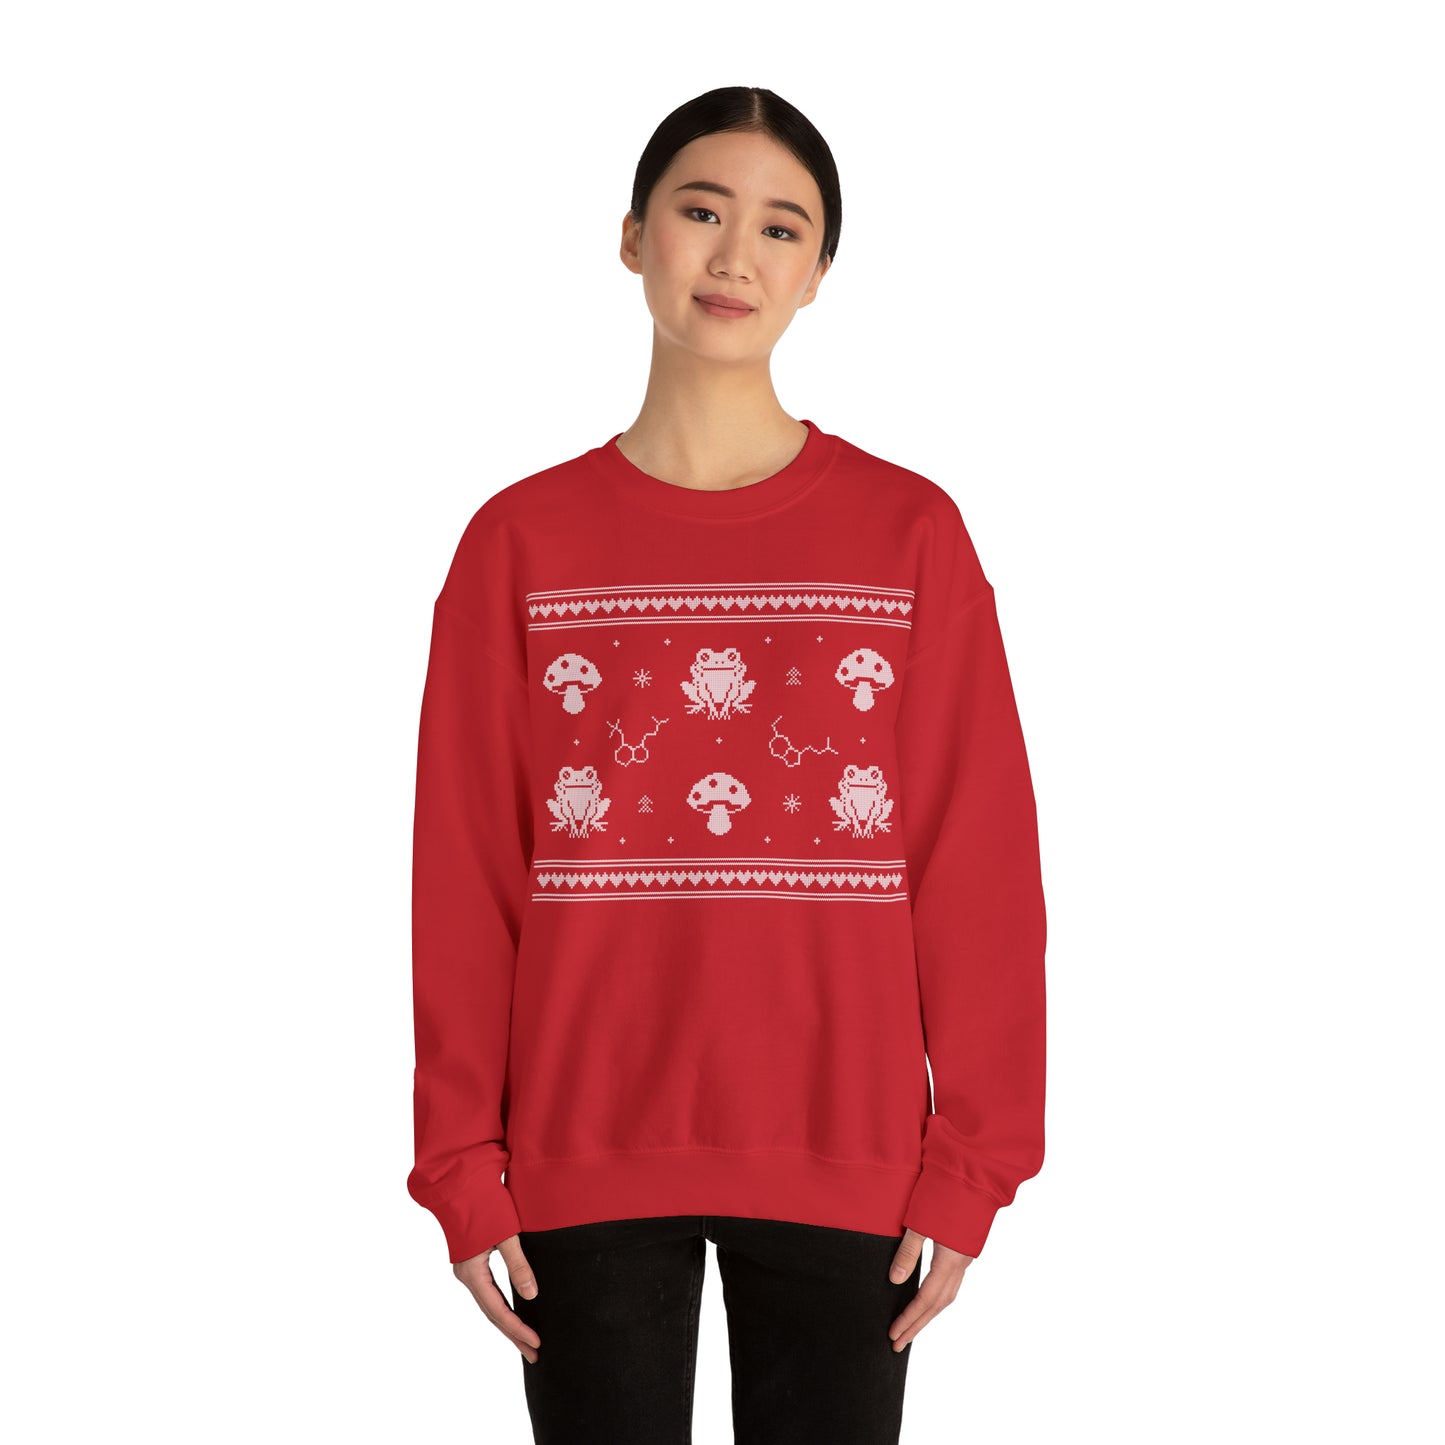 Psychedelic Love Ugly Sweater